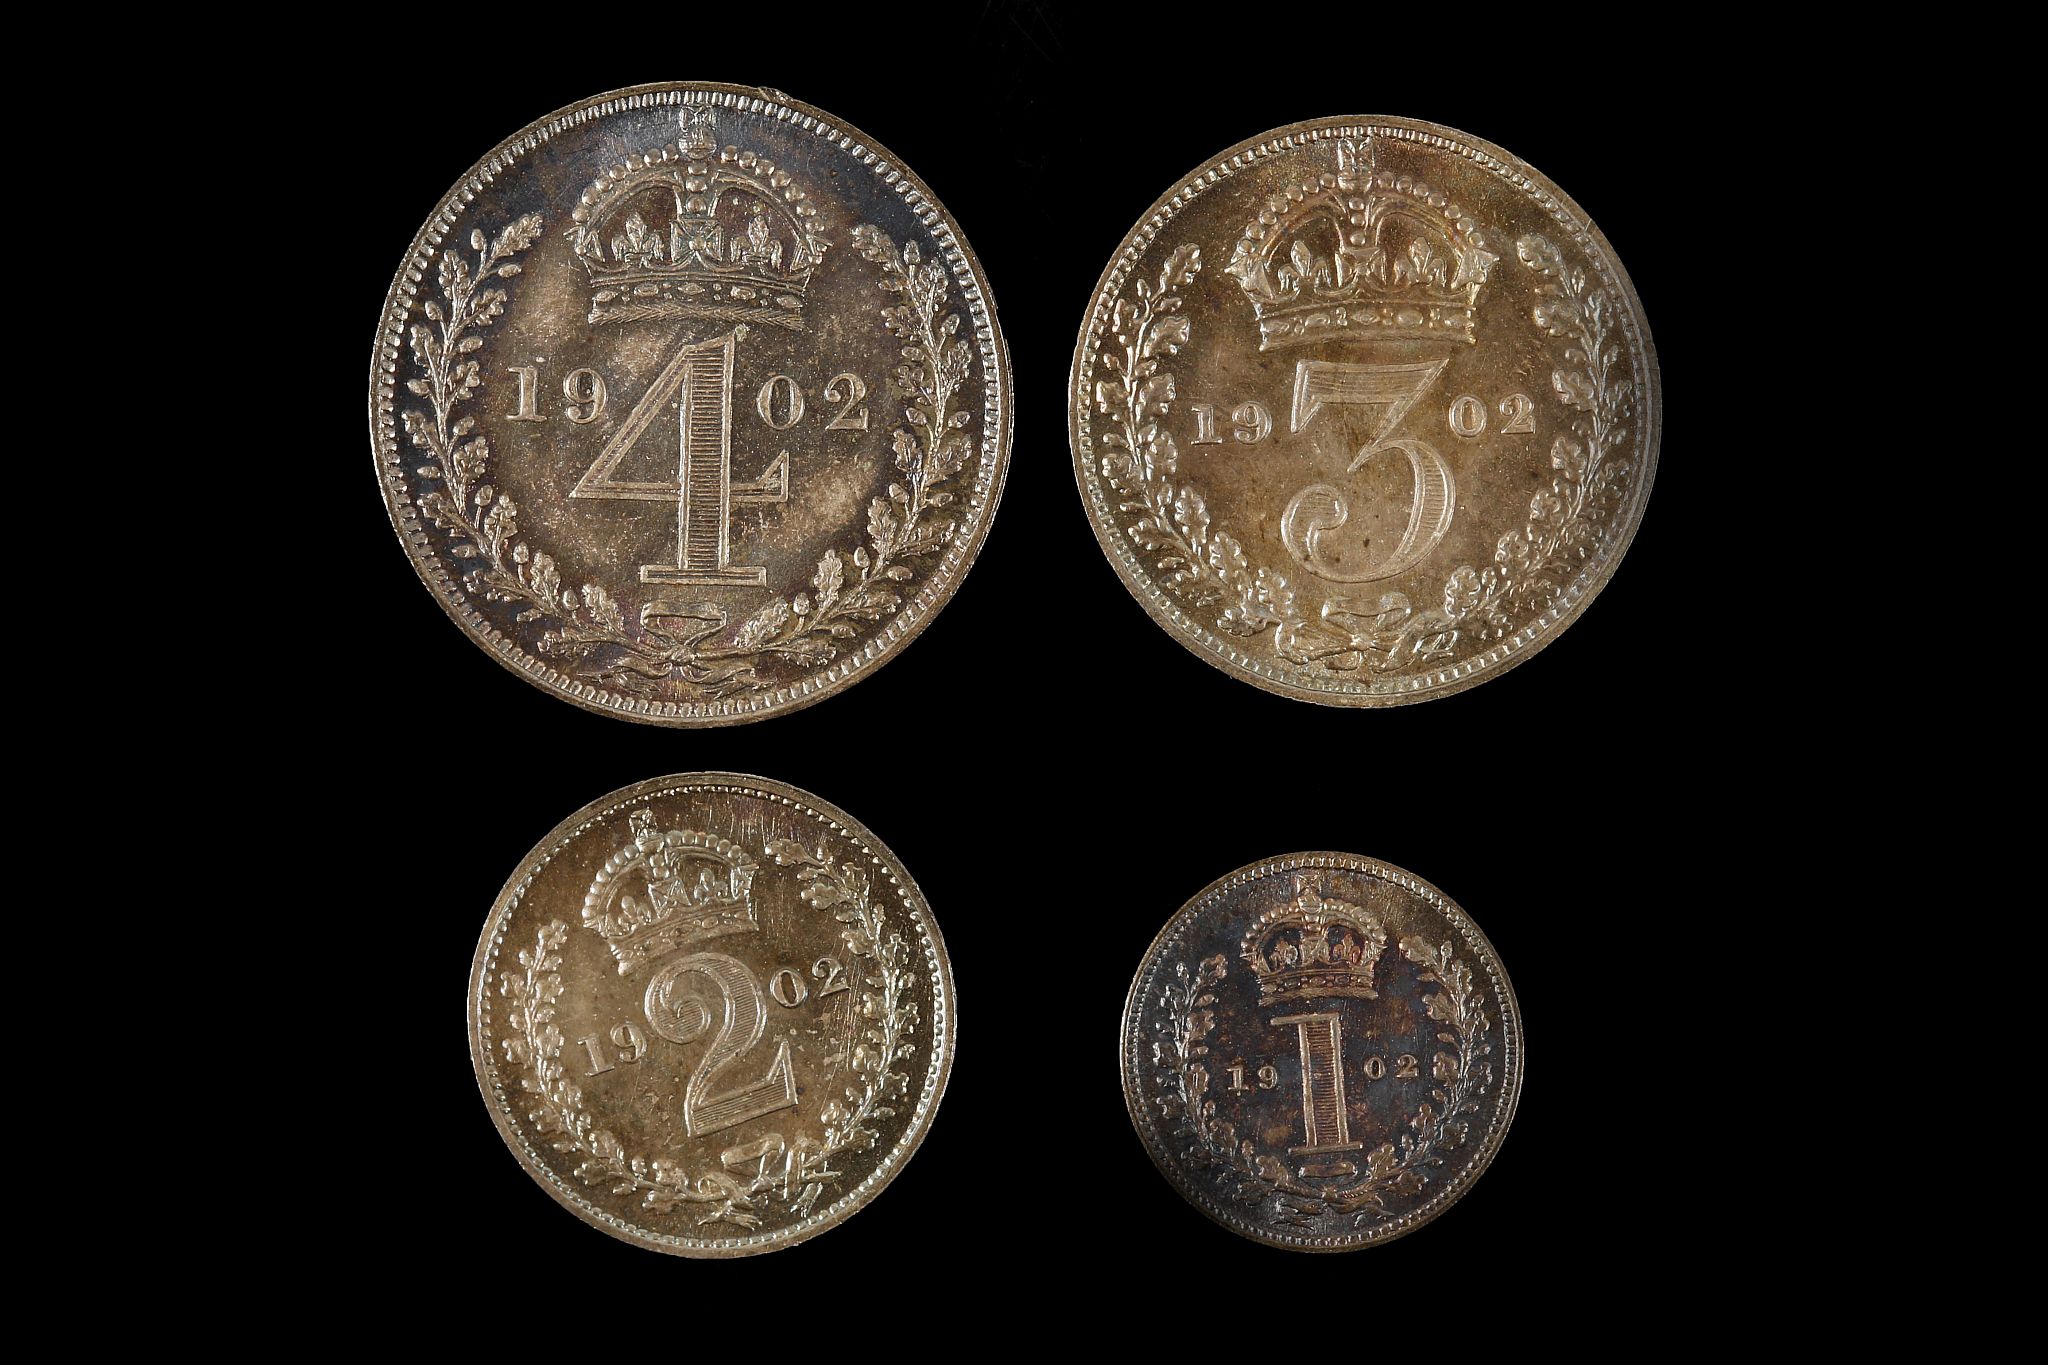 Edward VII 1902, maundy set of four coins in a red leather case with gilt enrichment, bust right /